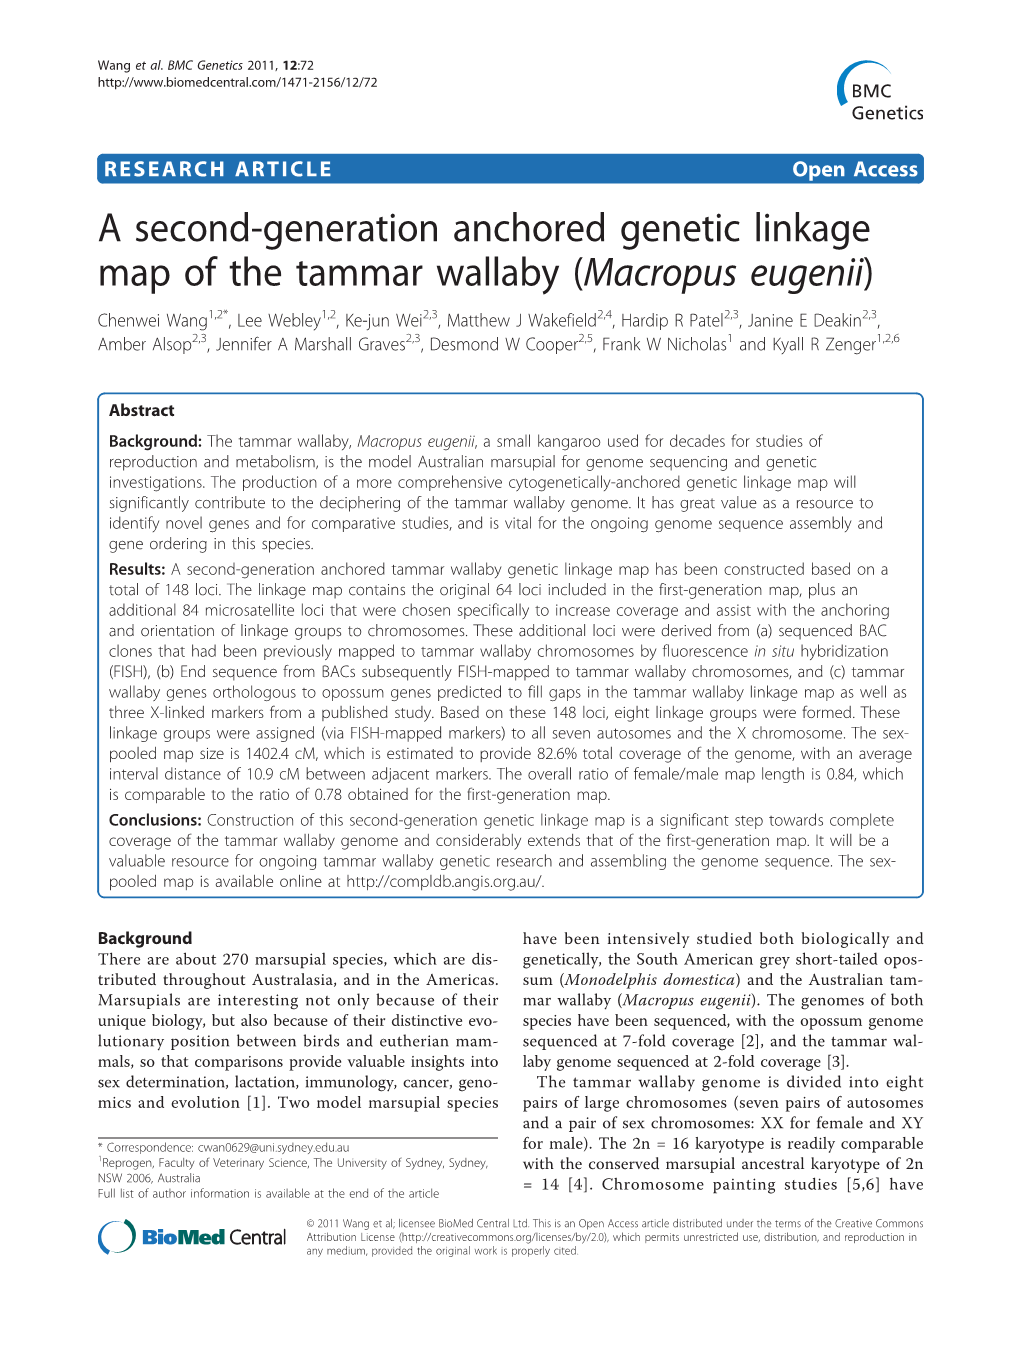 A Second-Generation Anchored Genetic Linkage Map of the Tammar Wallaby